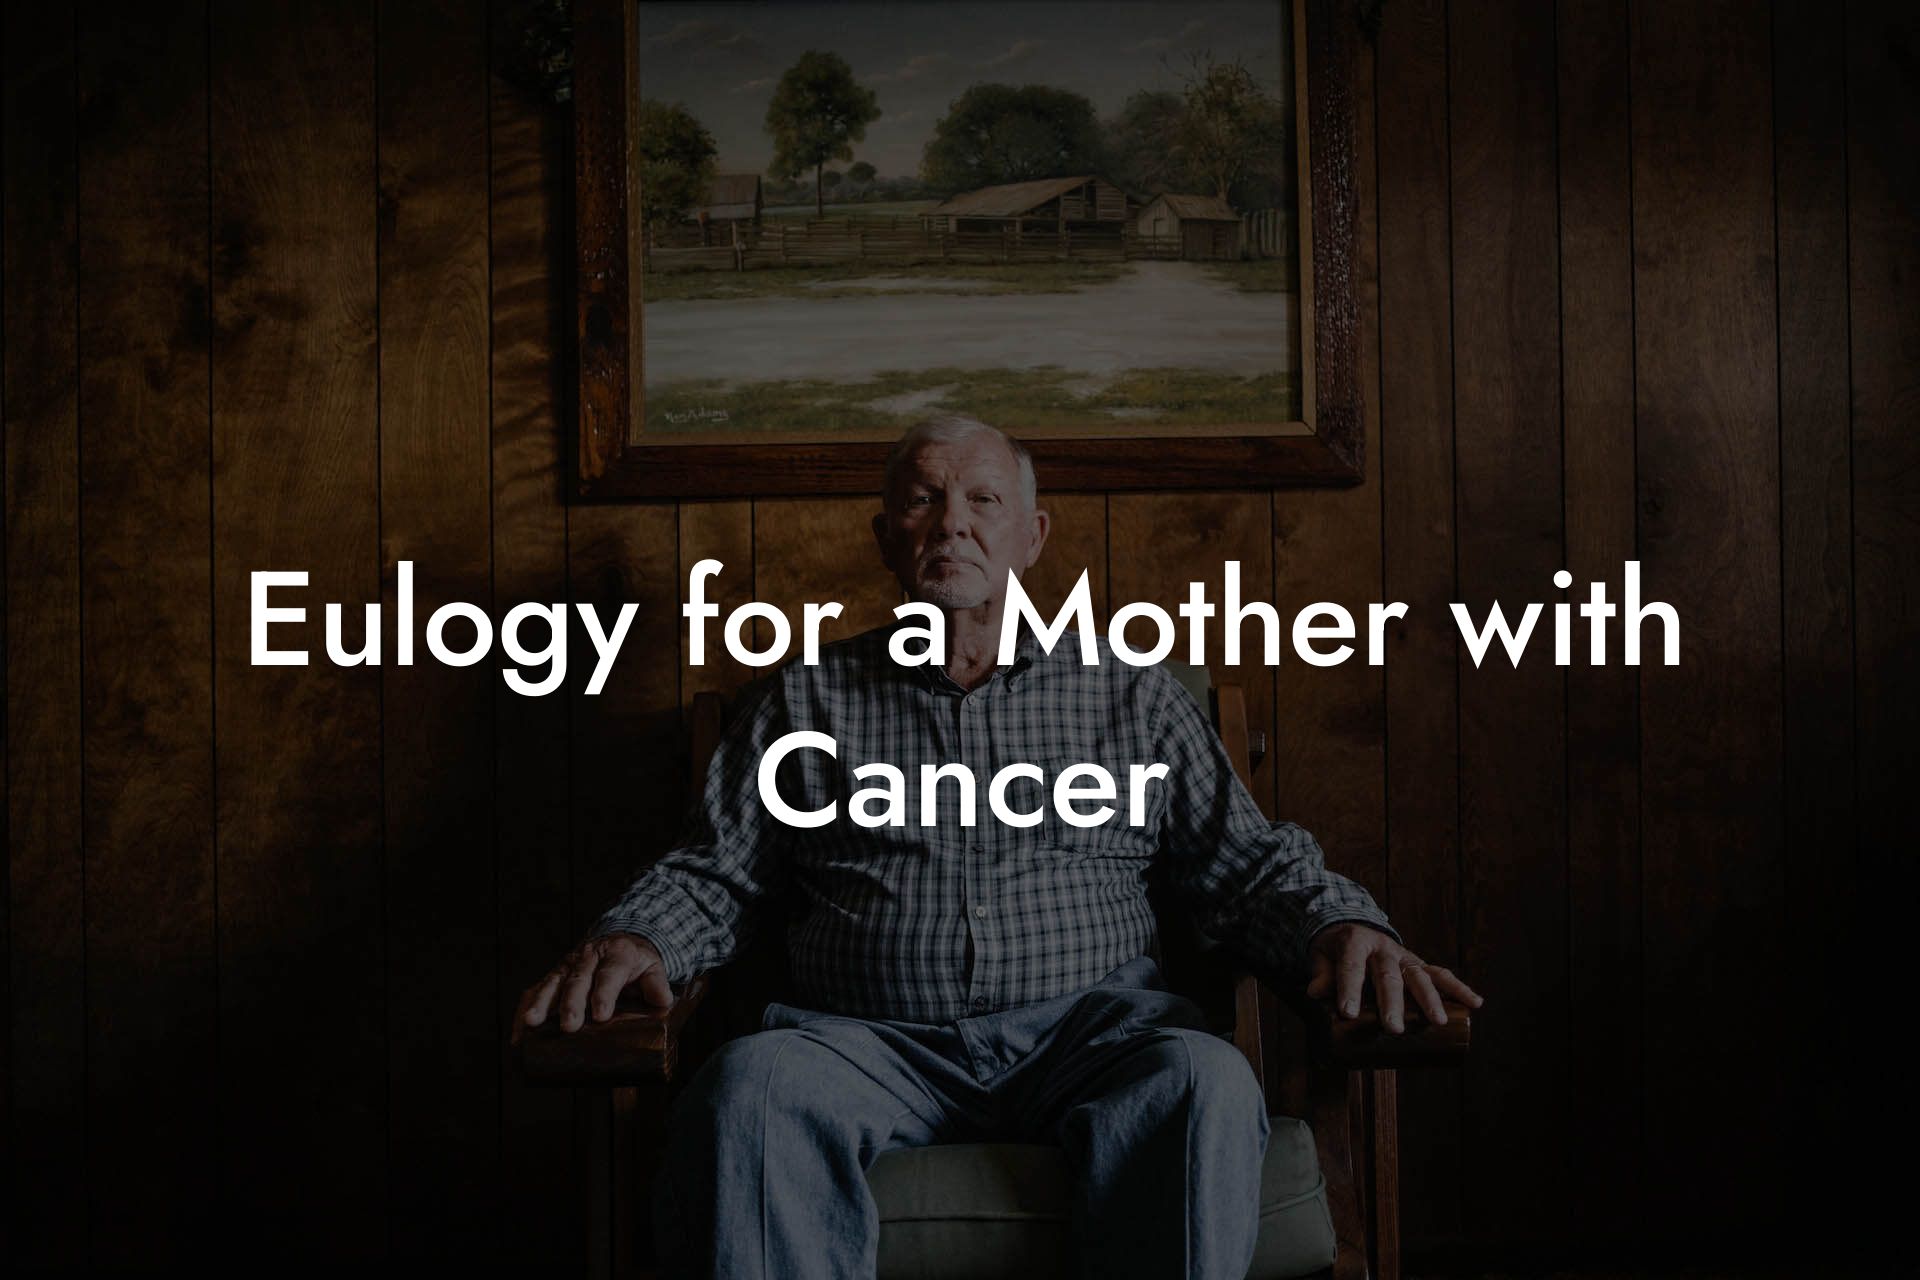 Eulogy for a Mother with Cancer